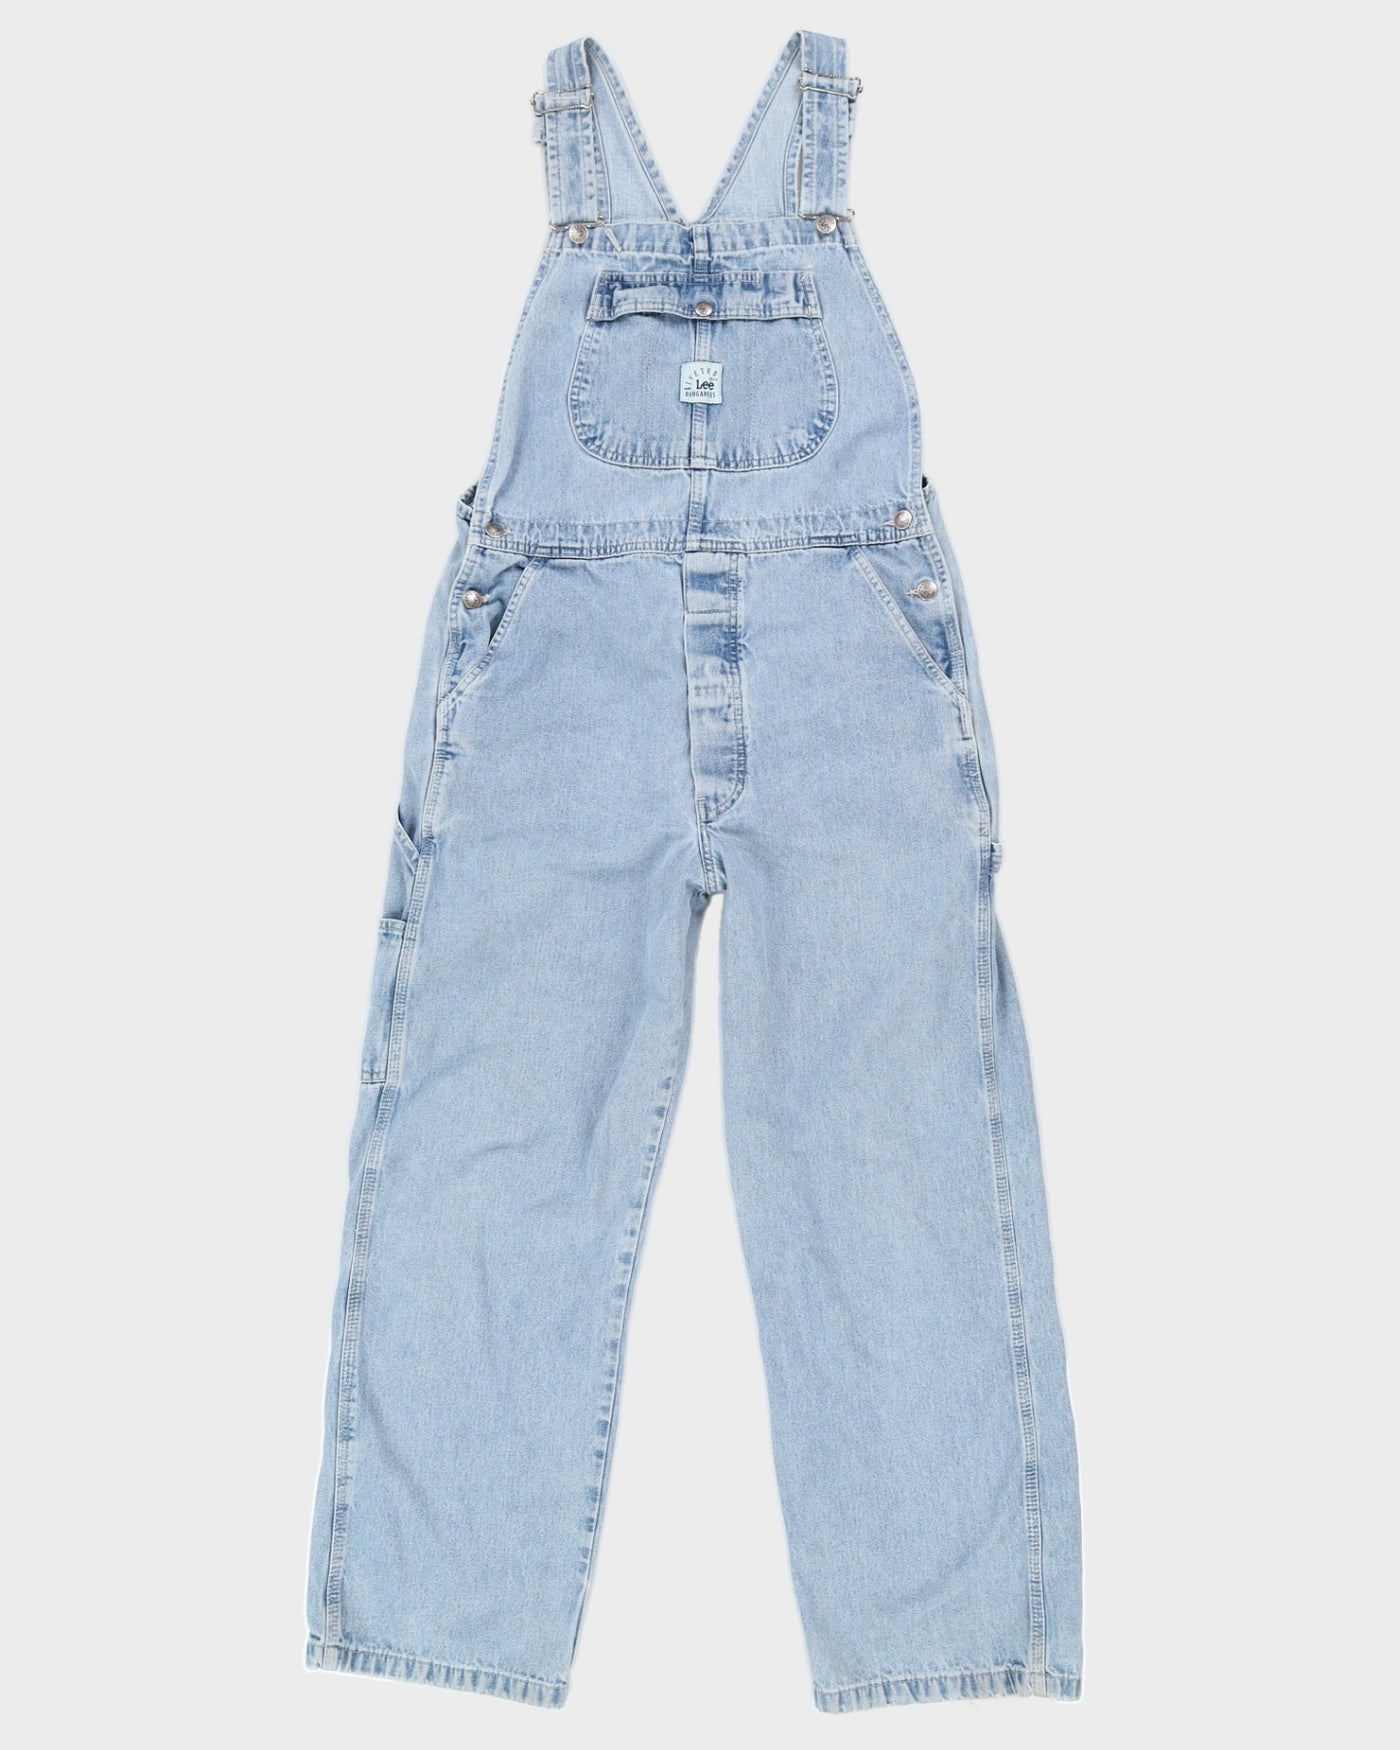 Lee Long Dungarees - S